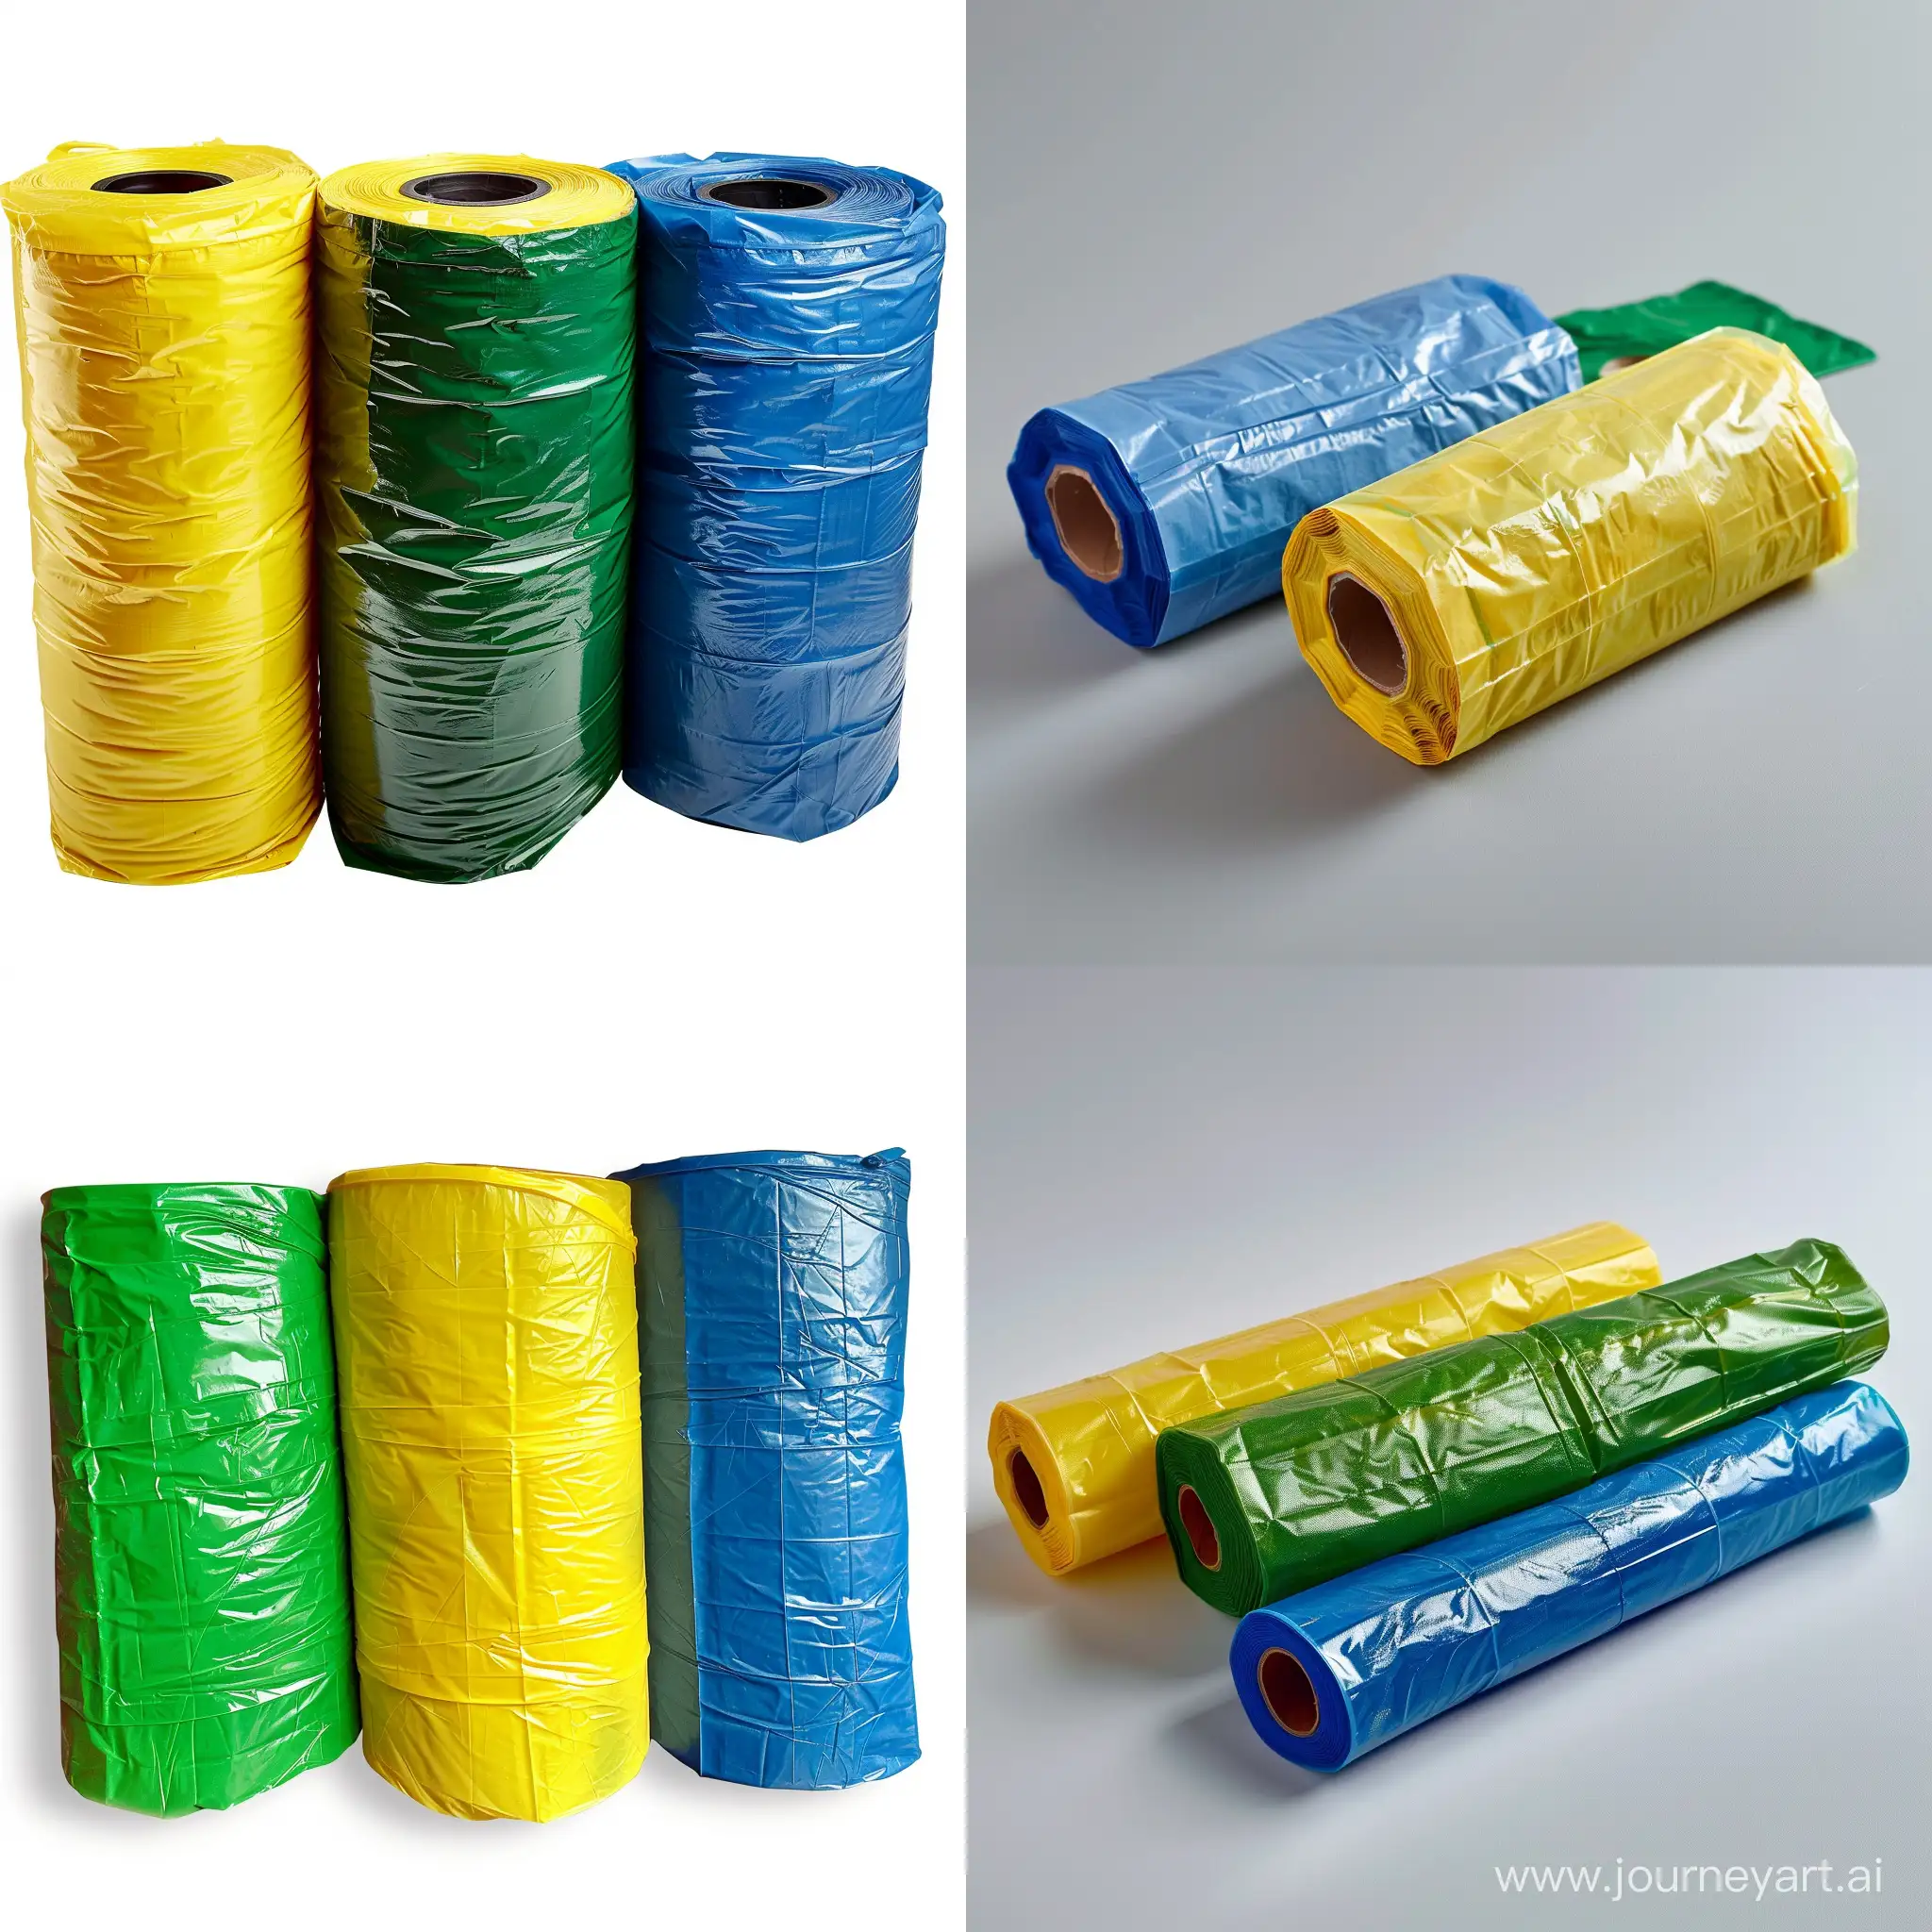 Three roll garbage bags, in yellow, green and blue colors